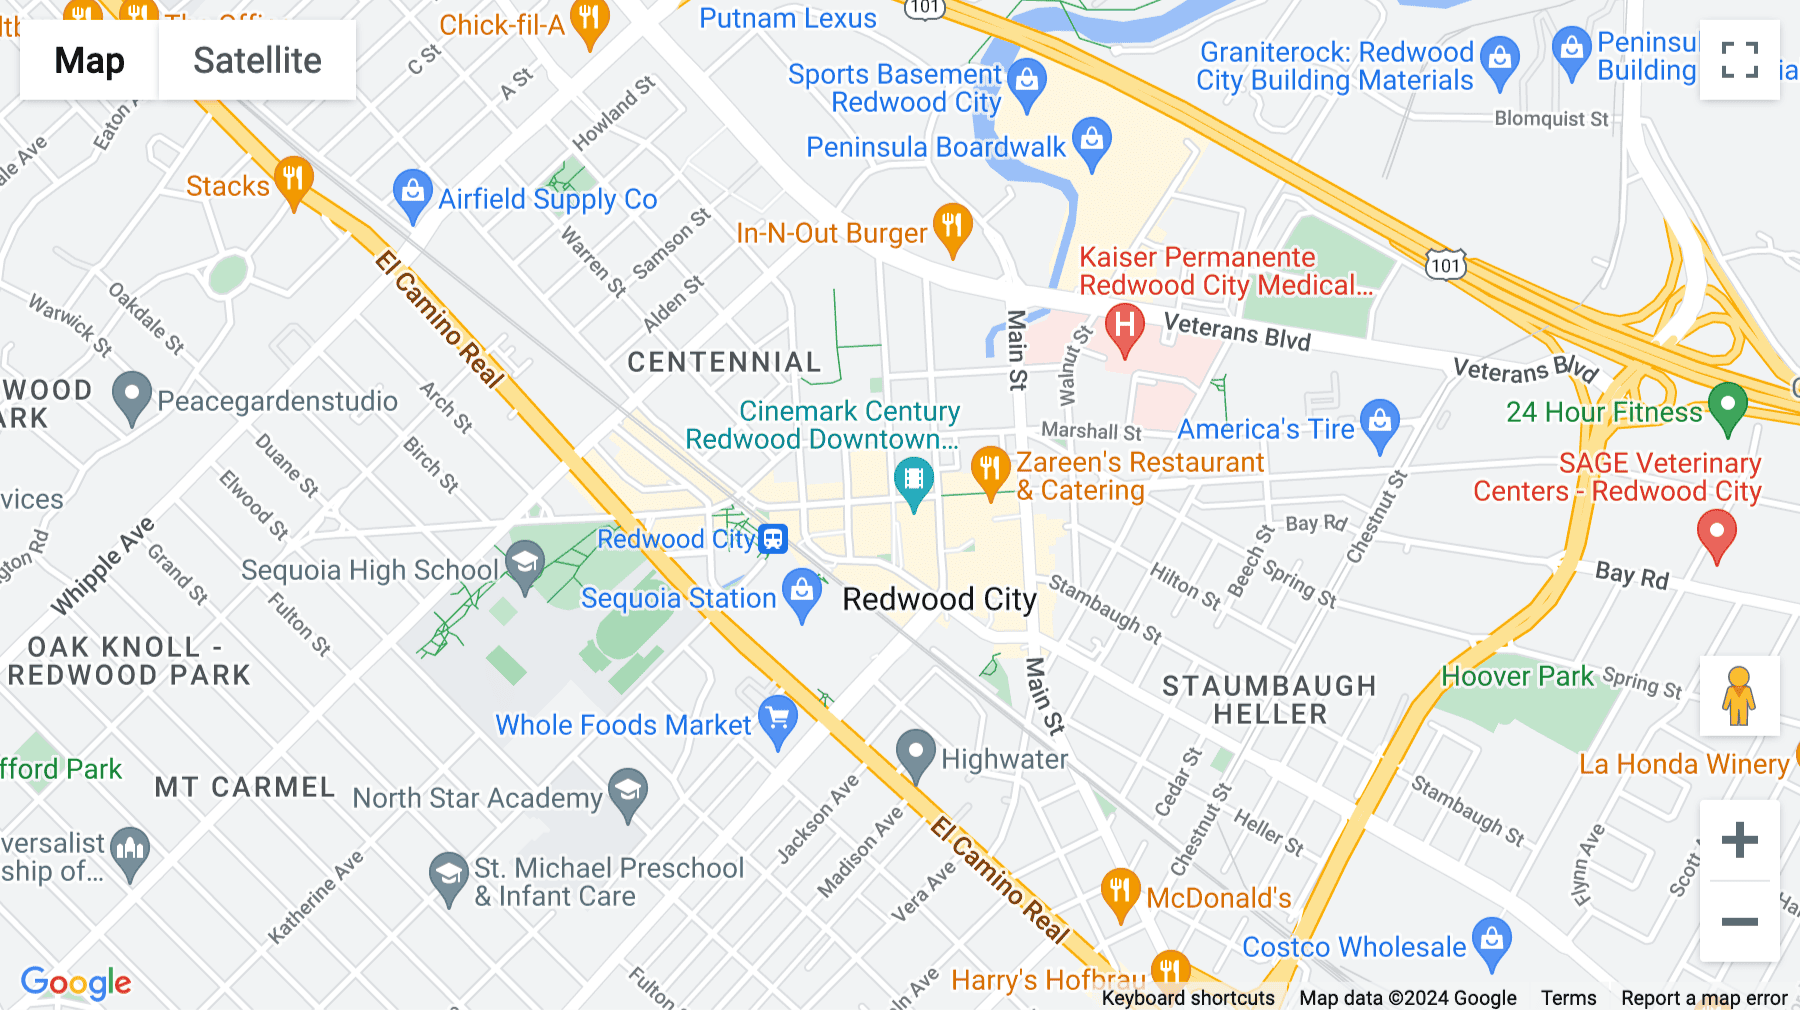 Click for interative map of 2125 Broadway, Redwood City, Redwood City